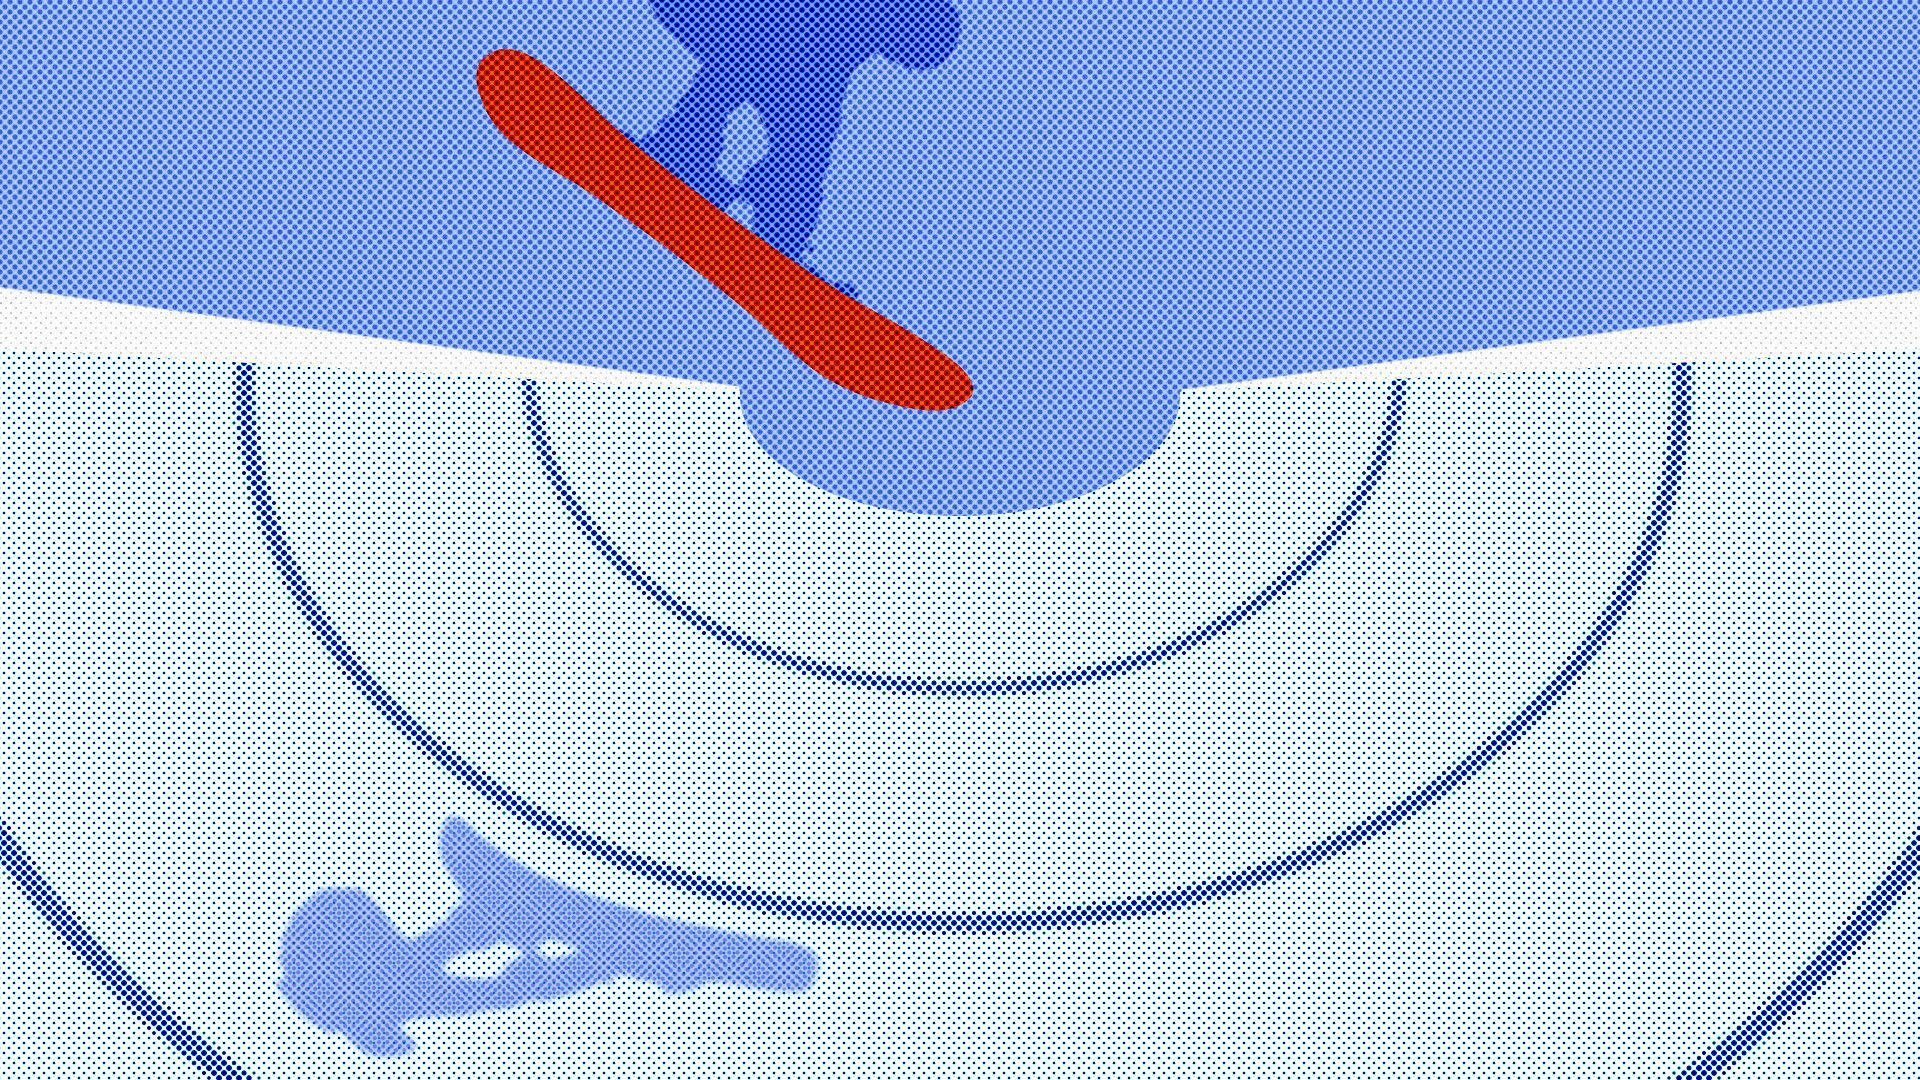 Illustration of a snowboarder in the air above a halfpipe.